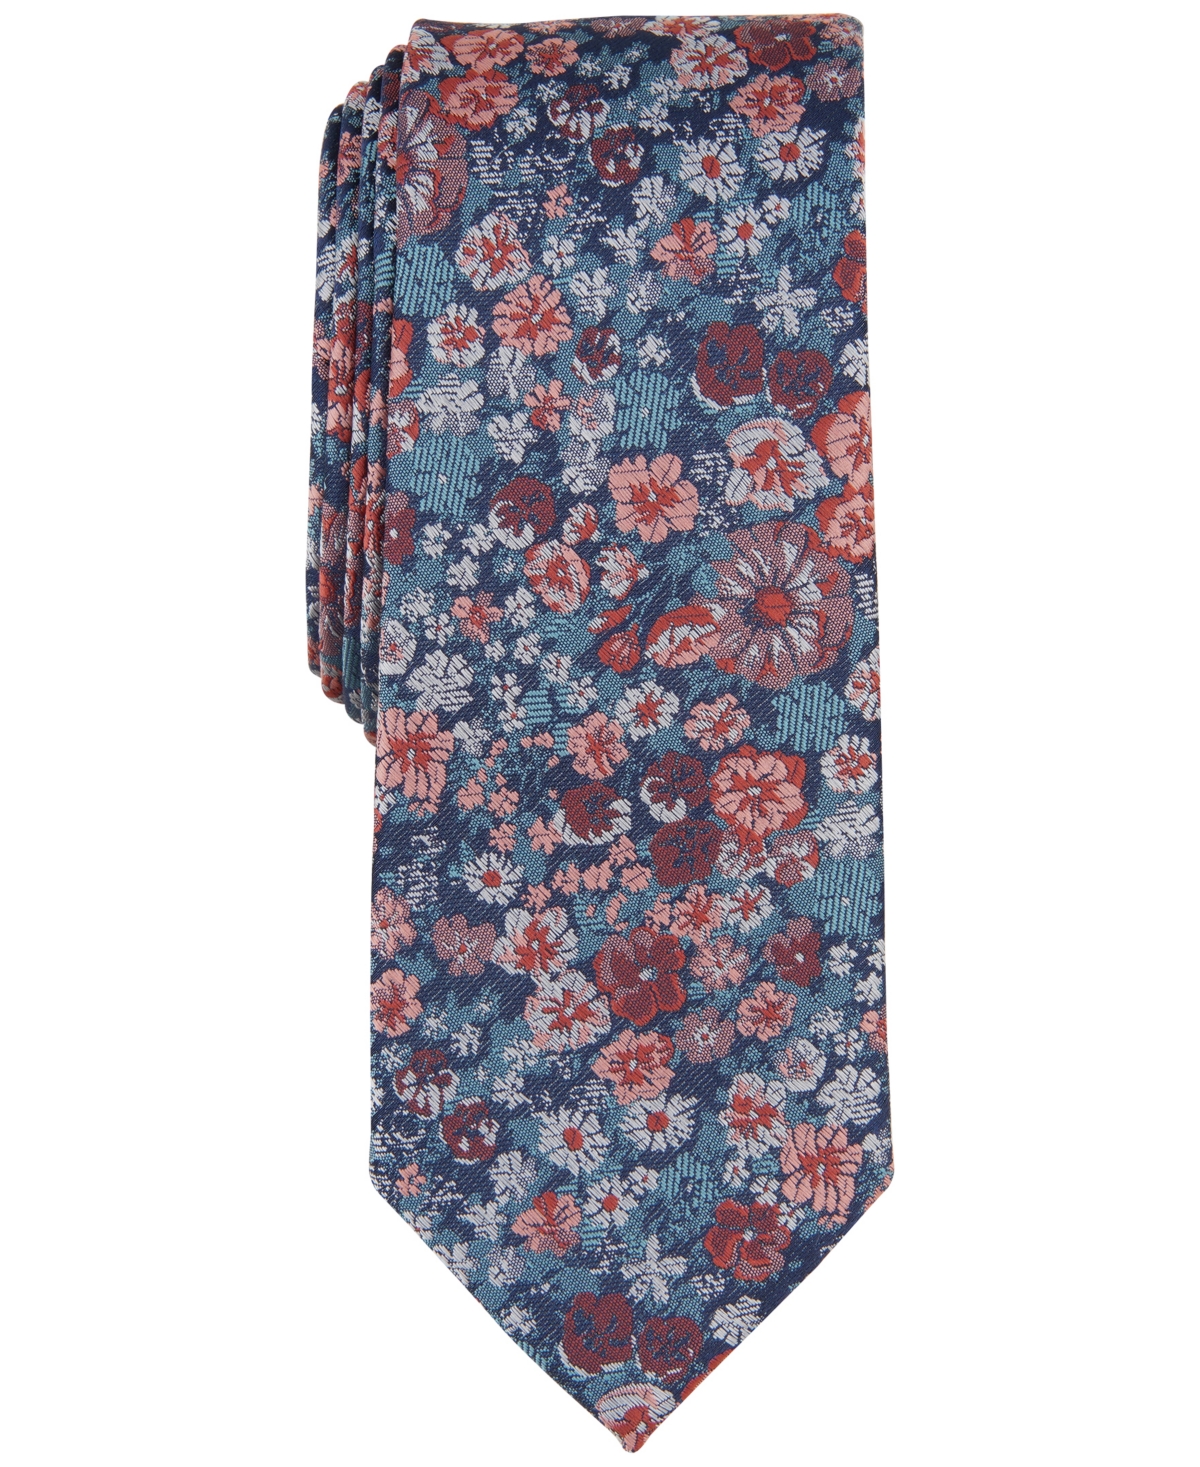 Men's Charland Floral Tie, Created for Macy's - Coral